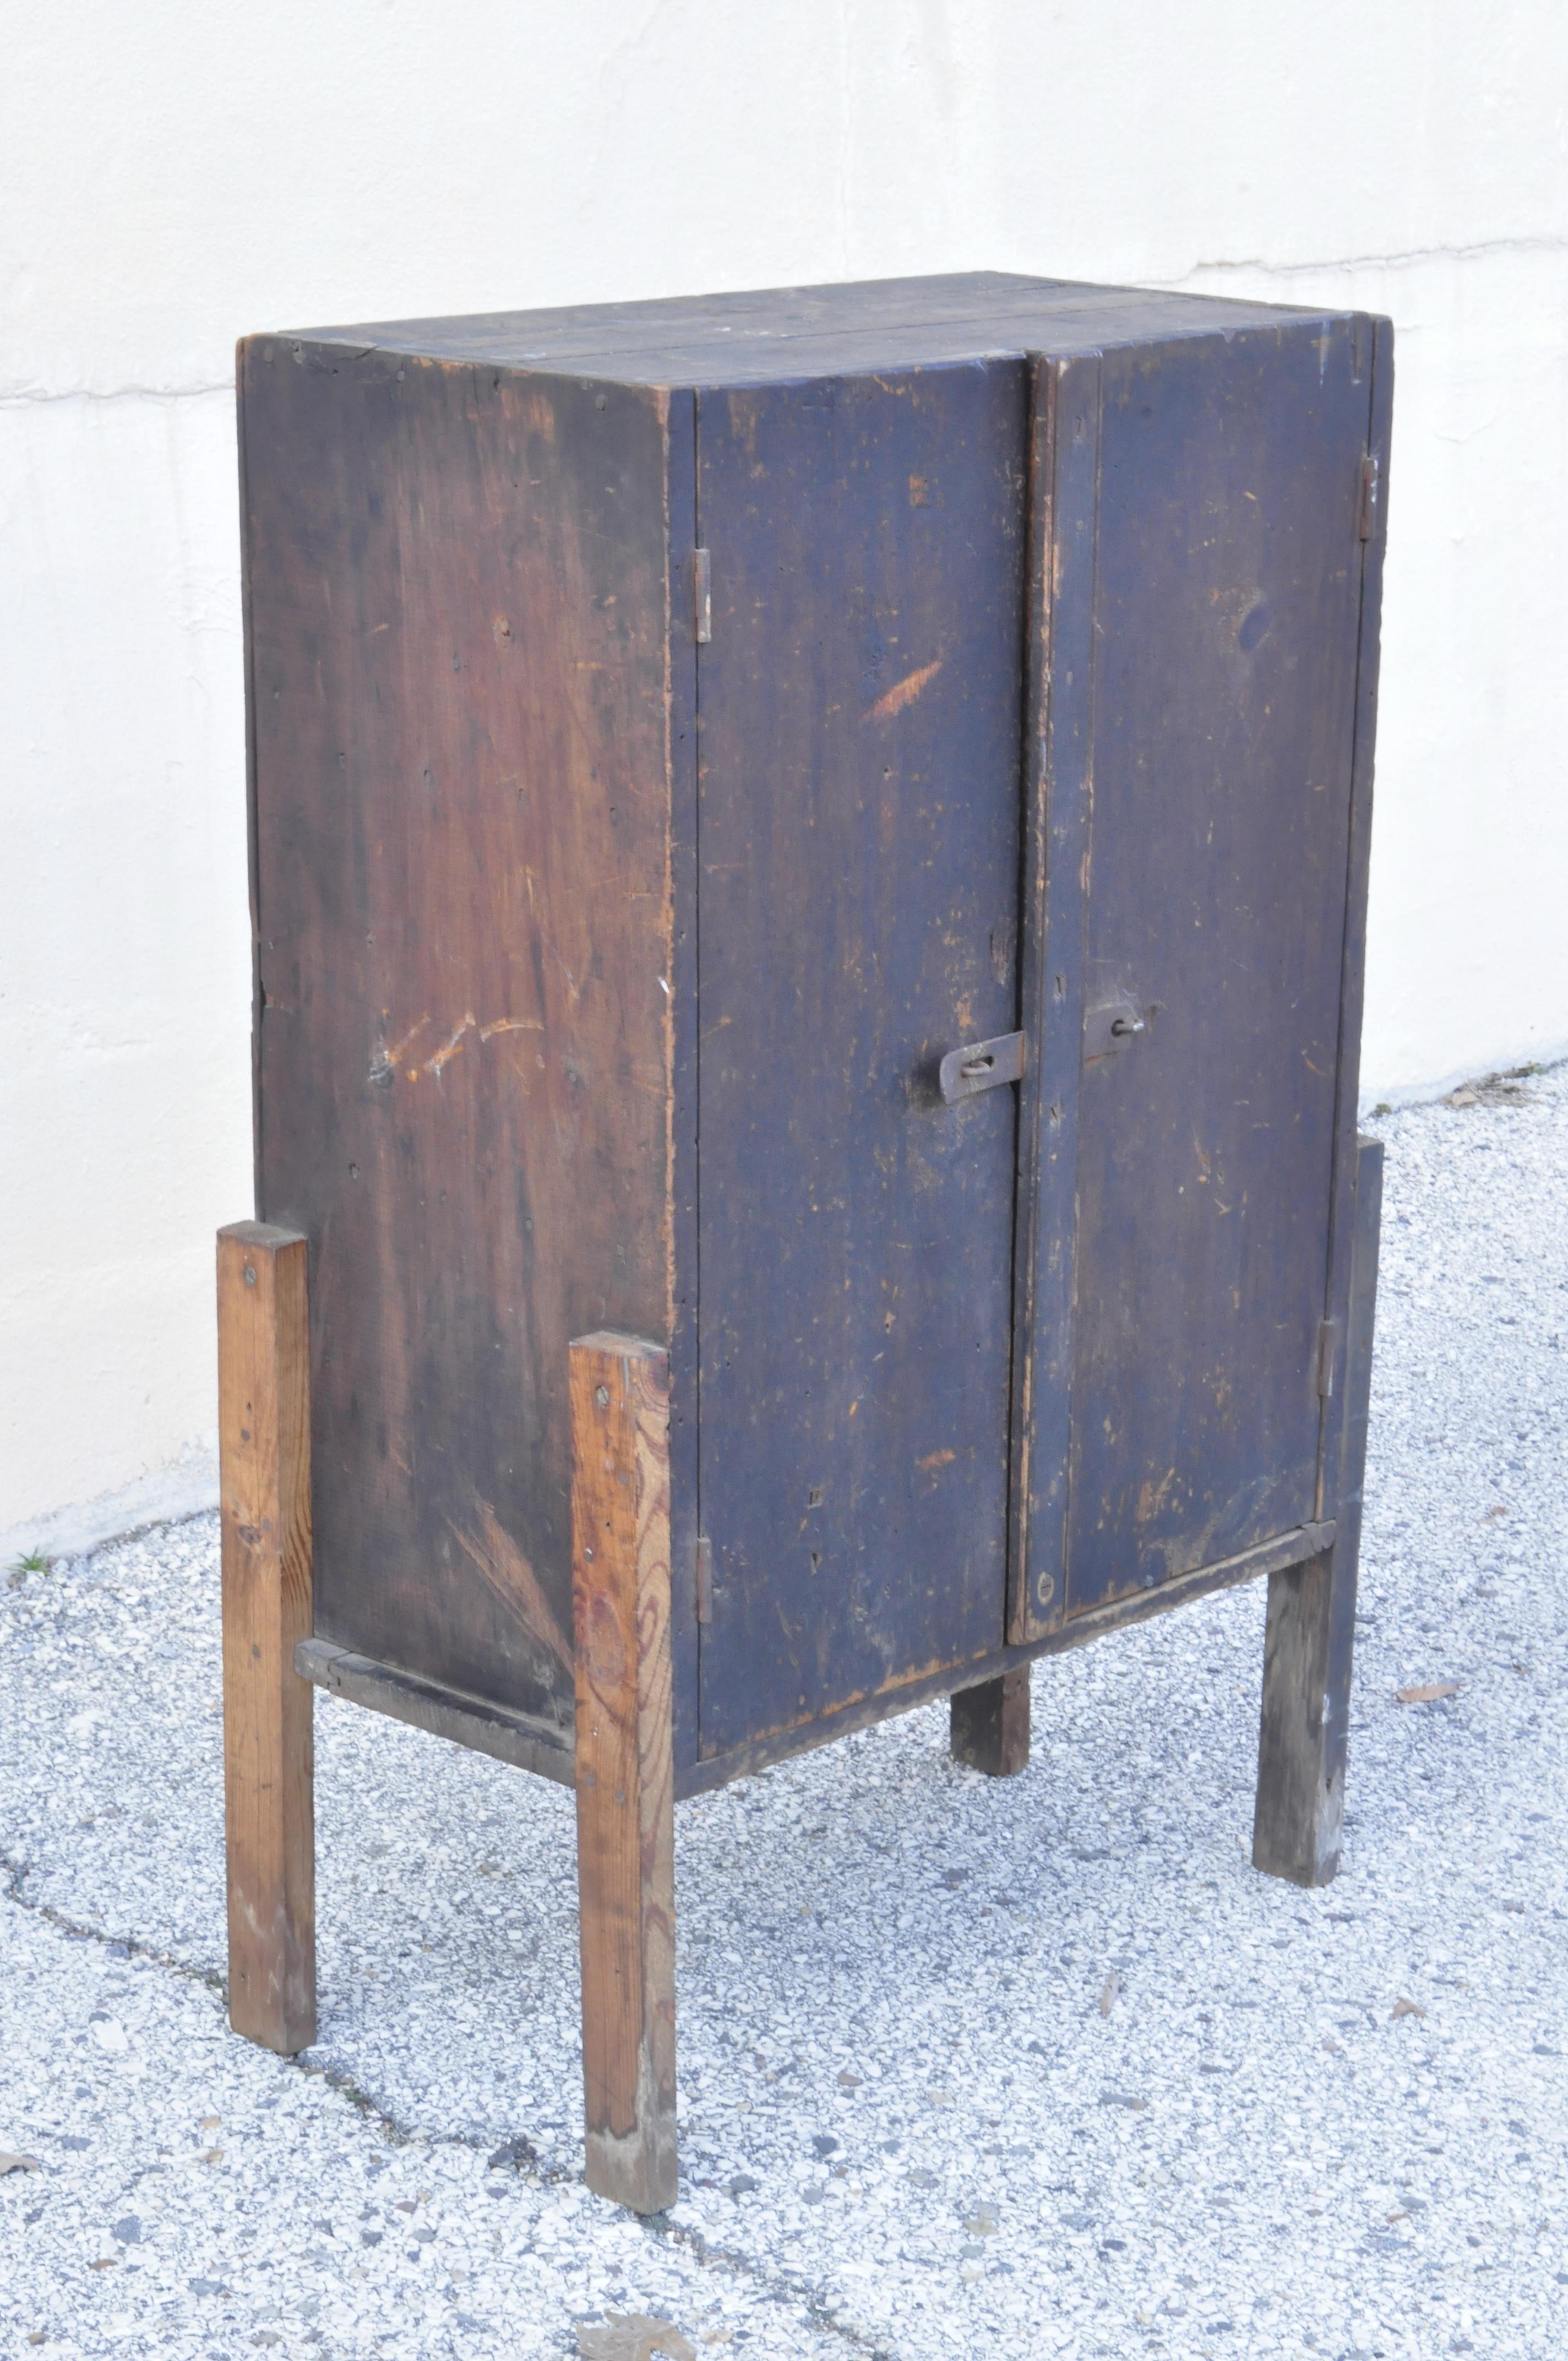 Antique American primitive distressed solid wood 2-door storage tool cabinet cupboard pantry. Item features wonderful patina, solid wood construction, distressed finish, 2 swing doors. Legs appear to be a later addition, circa early to mid-1900s.